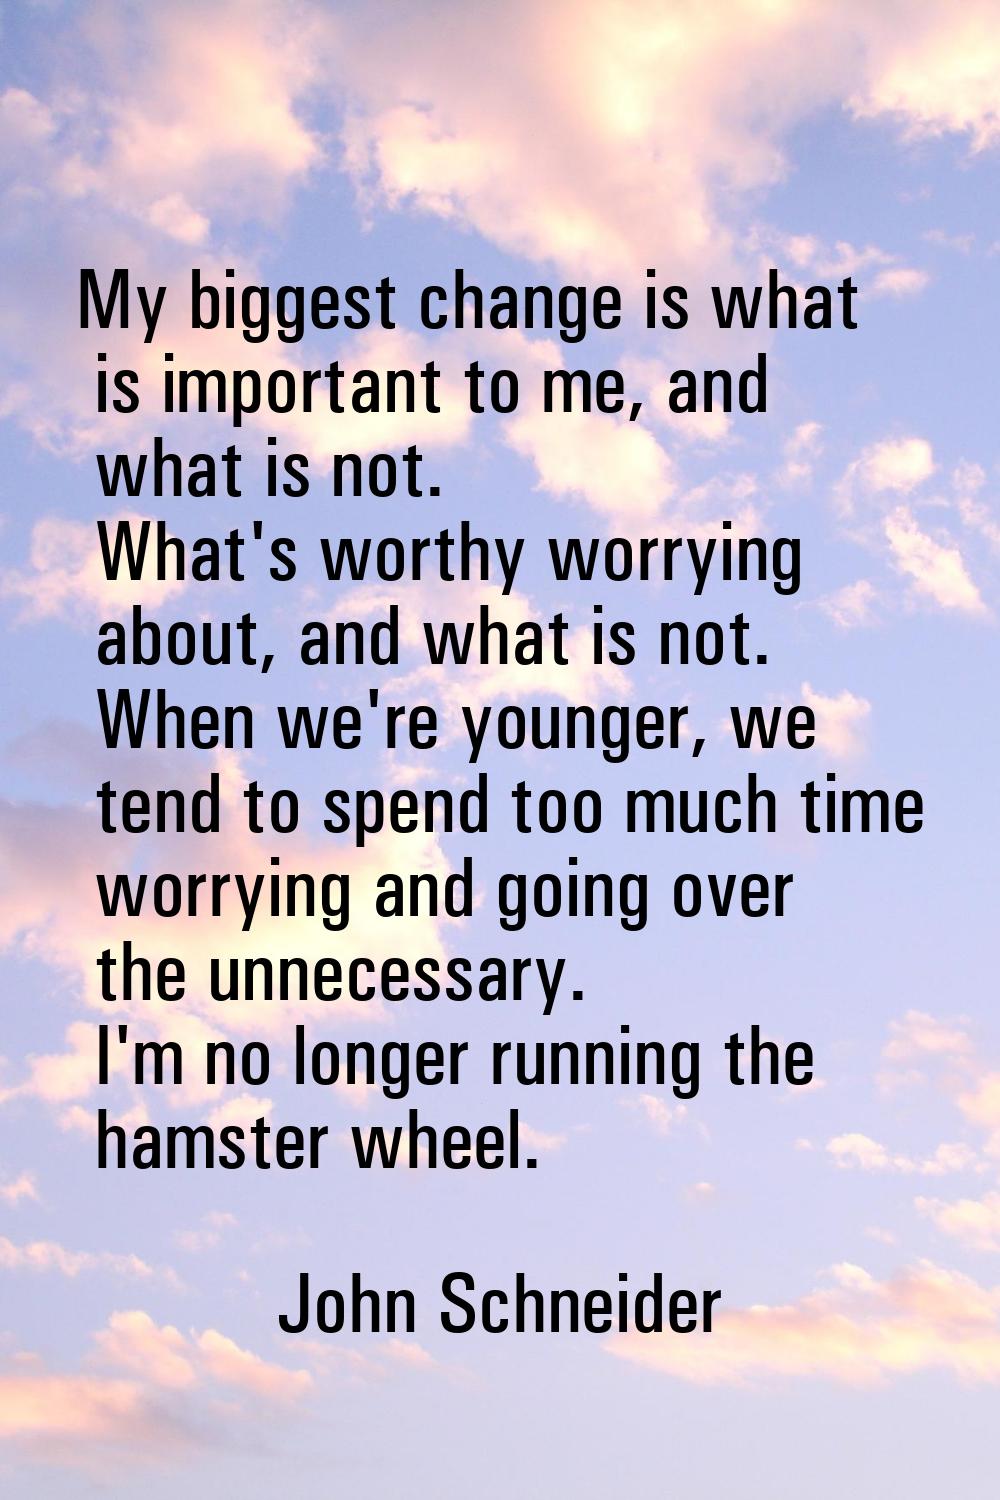 My biggest change is what is important to me, and what is not. What's worthy worrying about, and wh